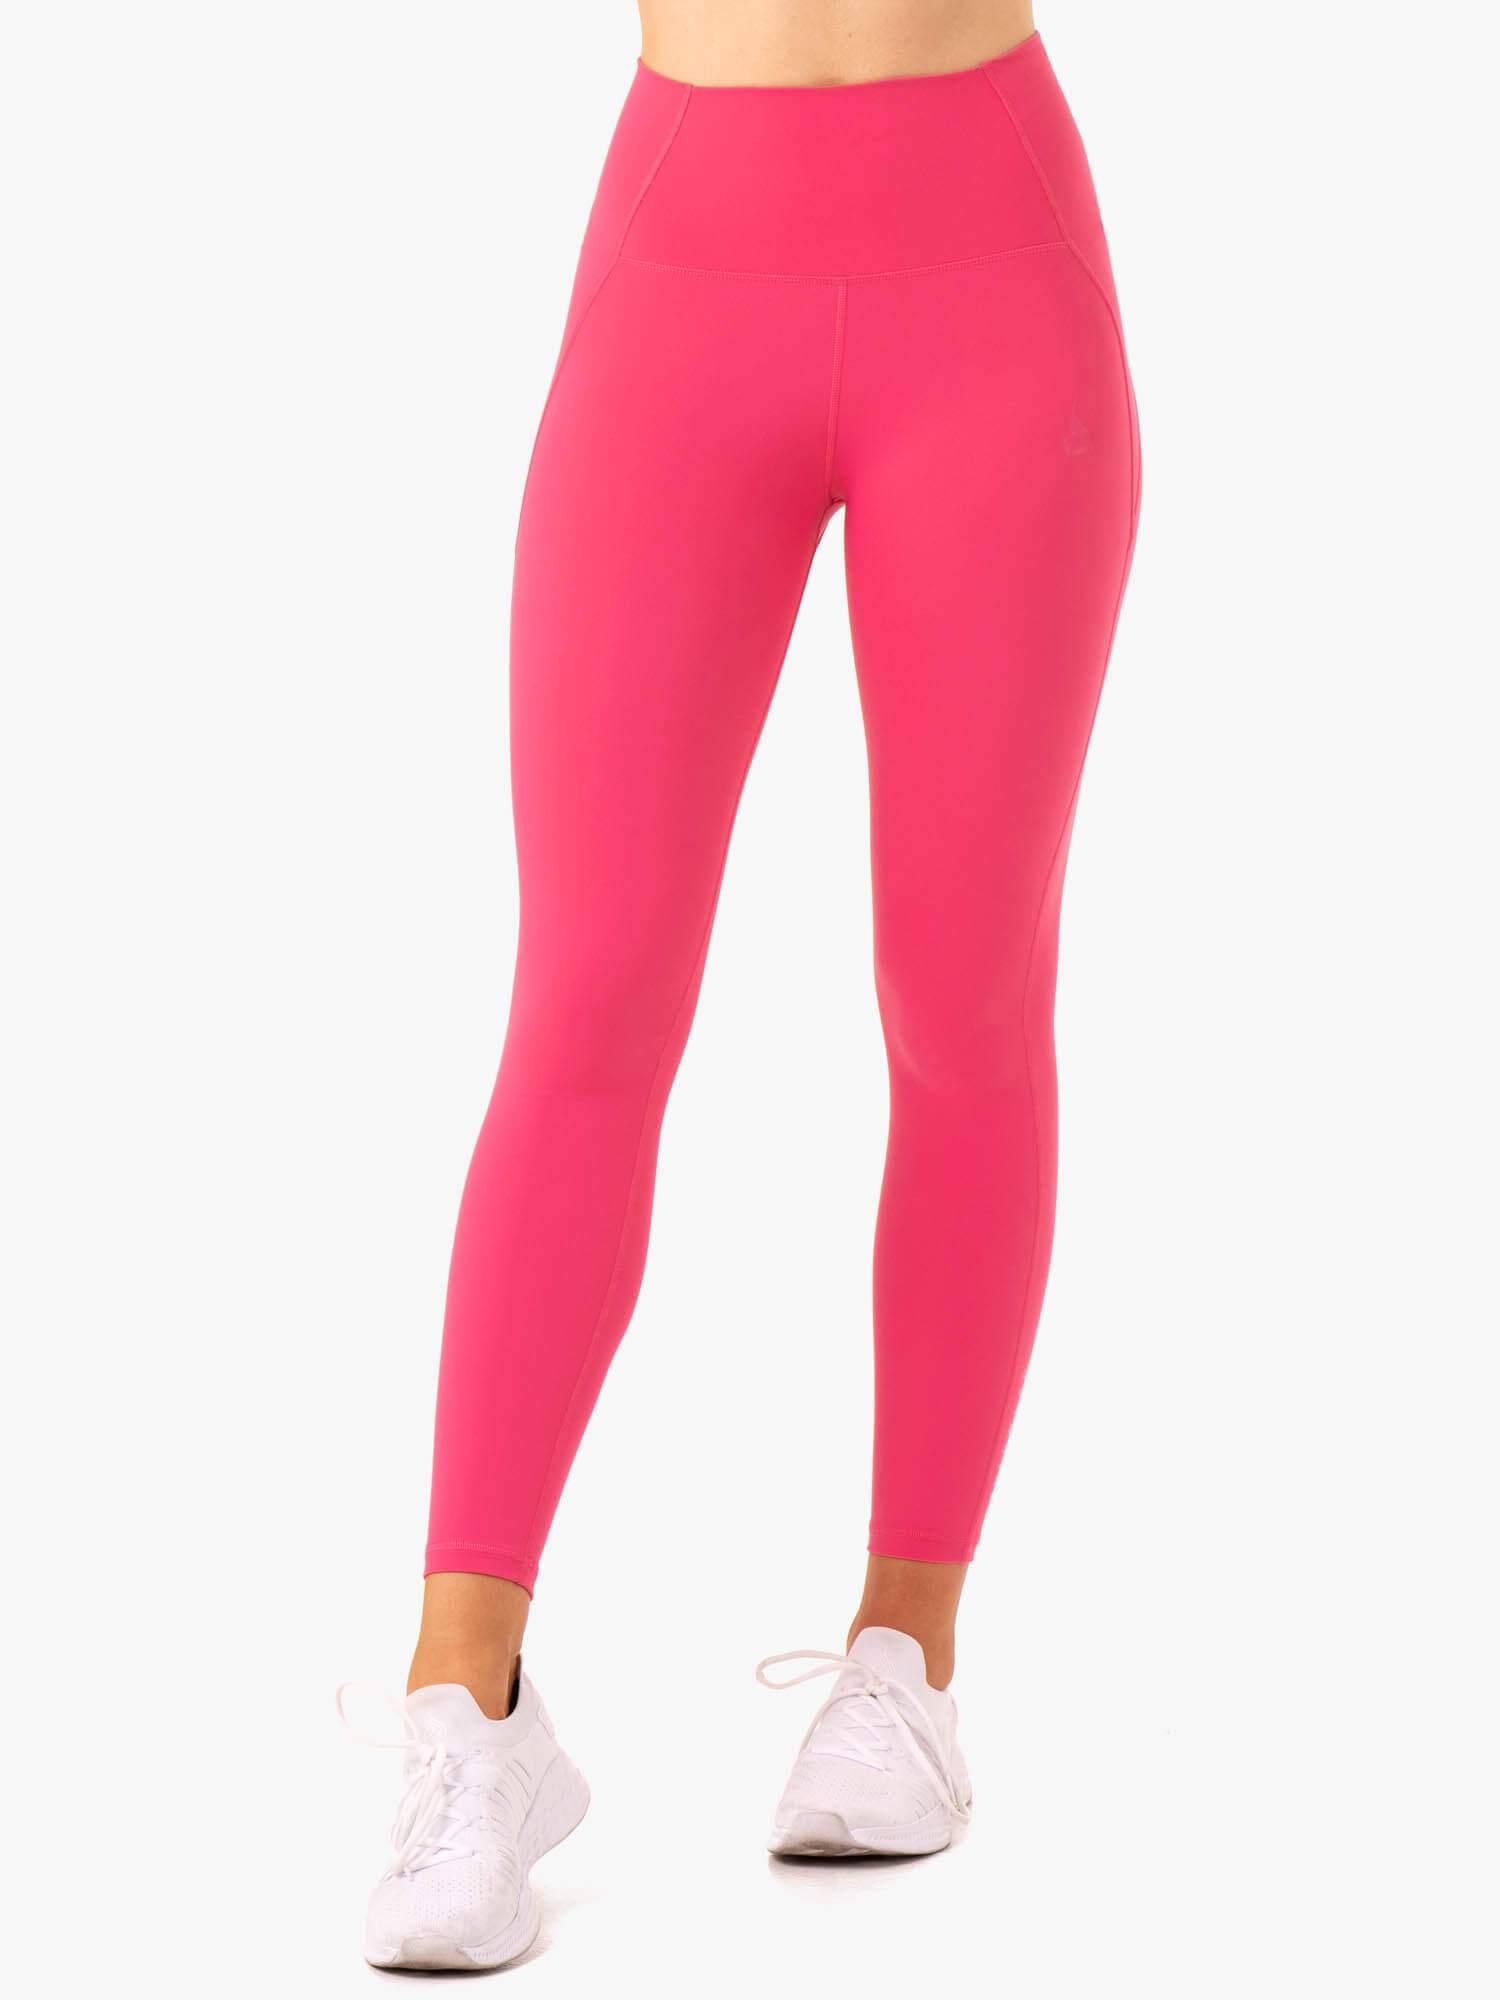 Nike Factory Store High Waisted Pink Tights & Leggings.